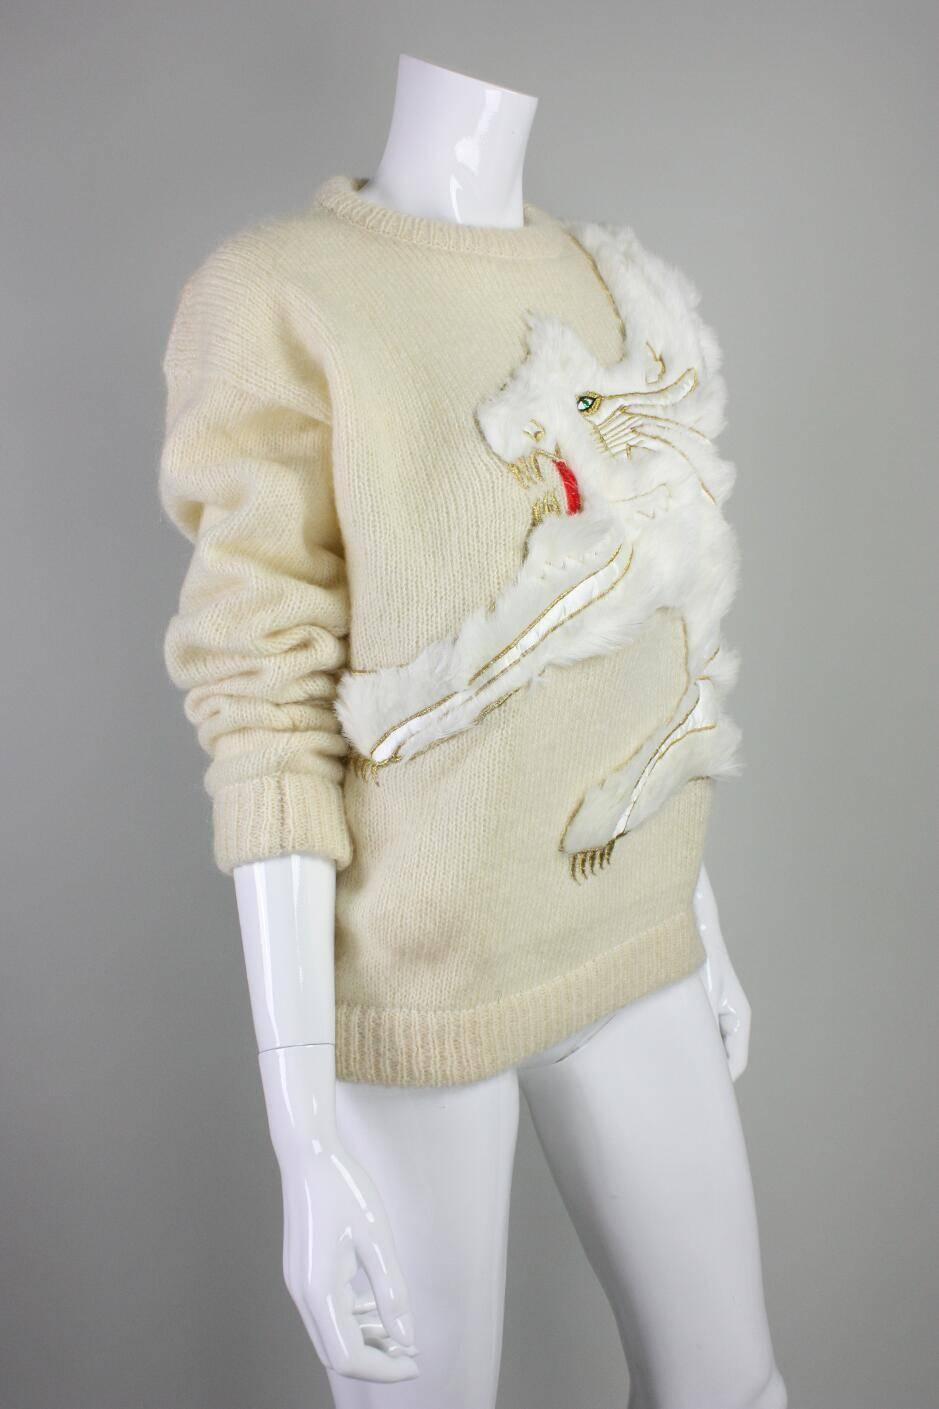 Vintage sweater from Kansai Yamamoto likely dates to the 1980's and is made of a wool/acrylic blend and features an appliqued creature made of white fur with gold, white and red embroidery.   Ribbed cuffs, collar, and waistband.  Unlined with no